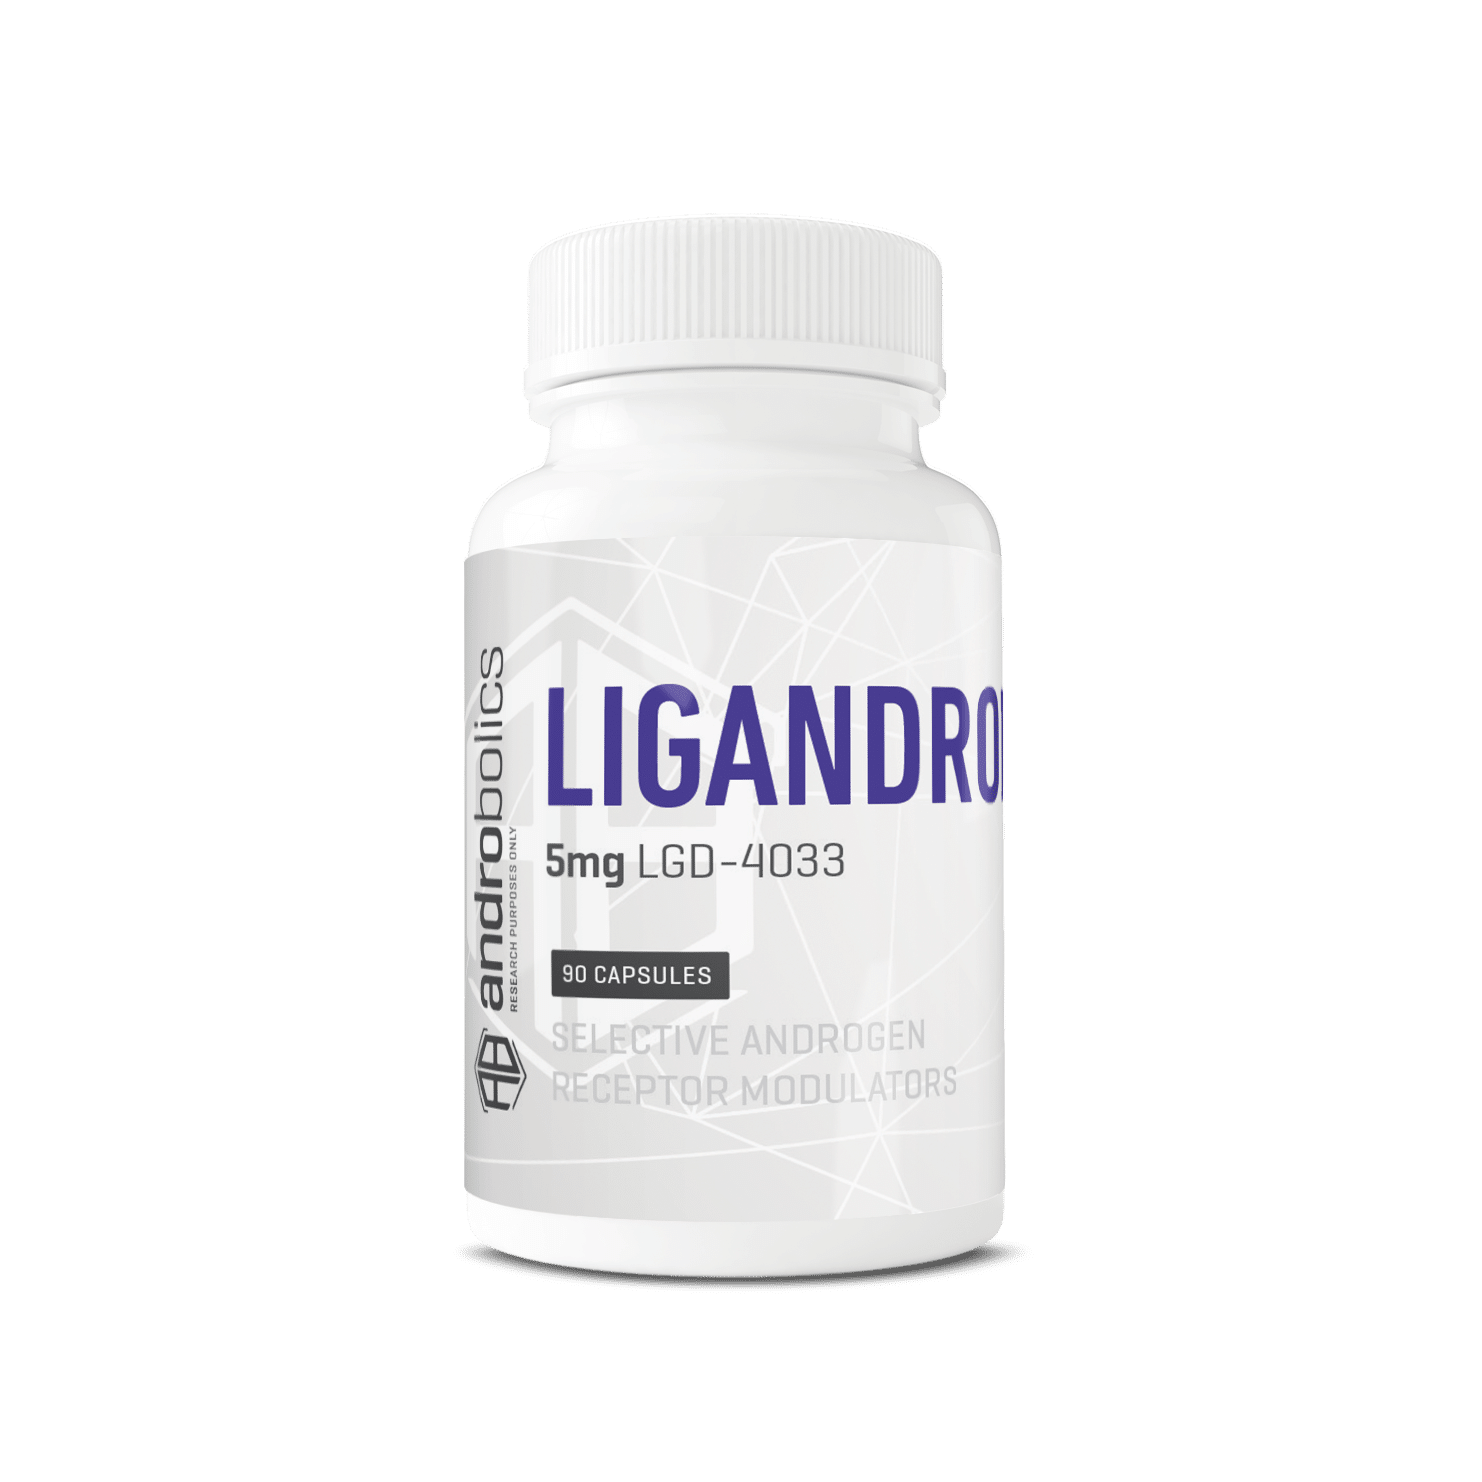 Ligandrol LGD 4033 SARM - 90 Capsules of 5mg for Improved Endurance and Muscle Growth